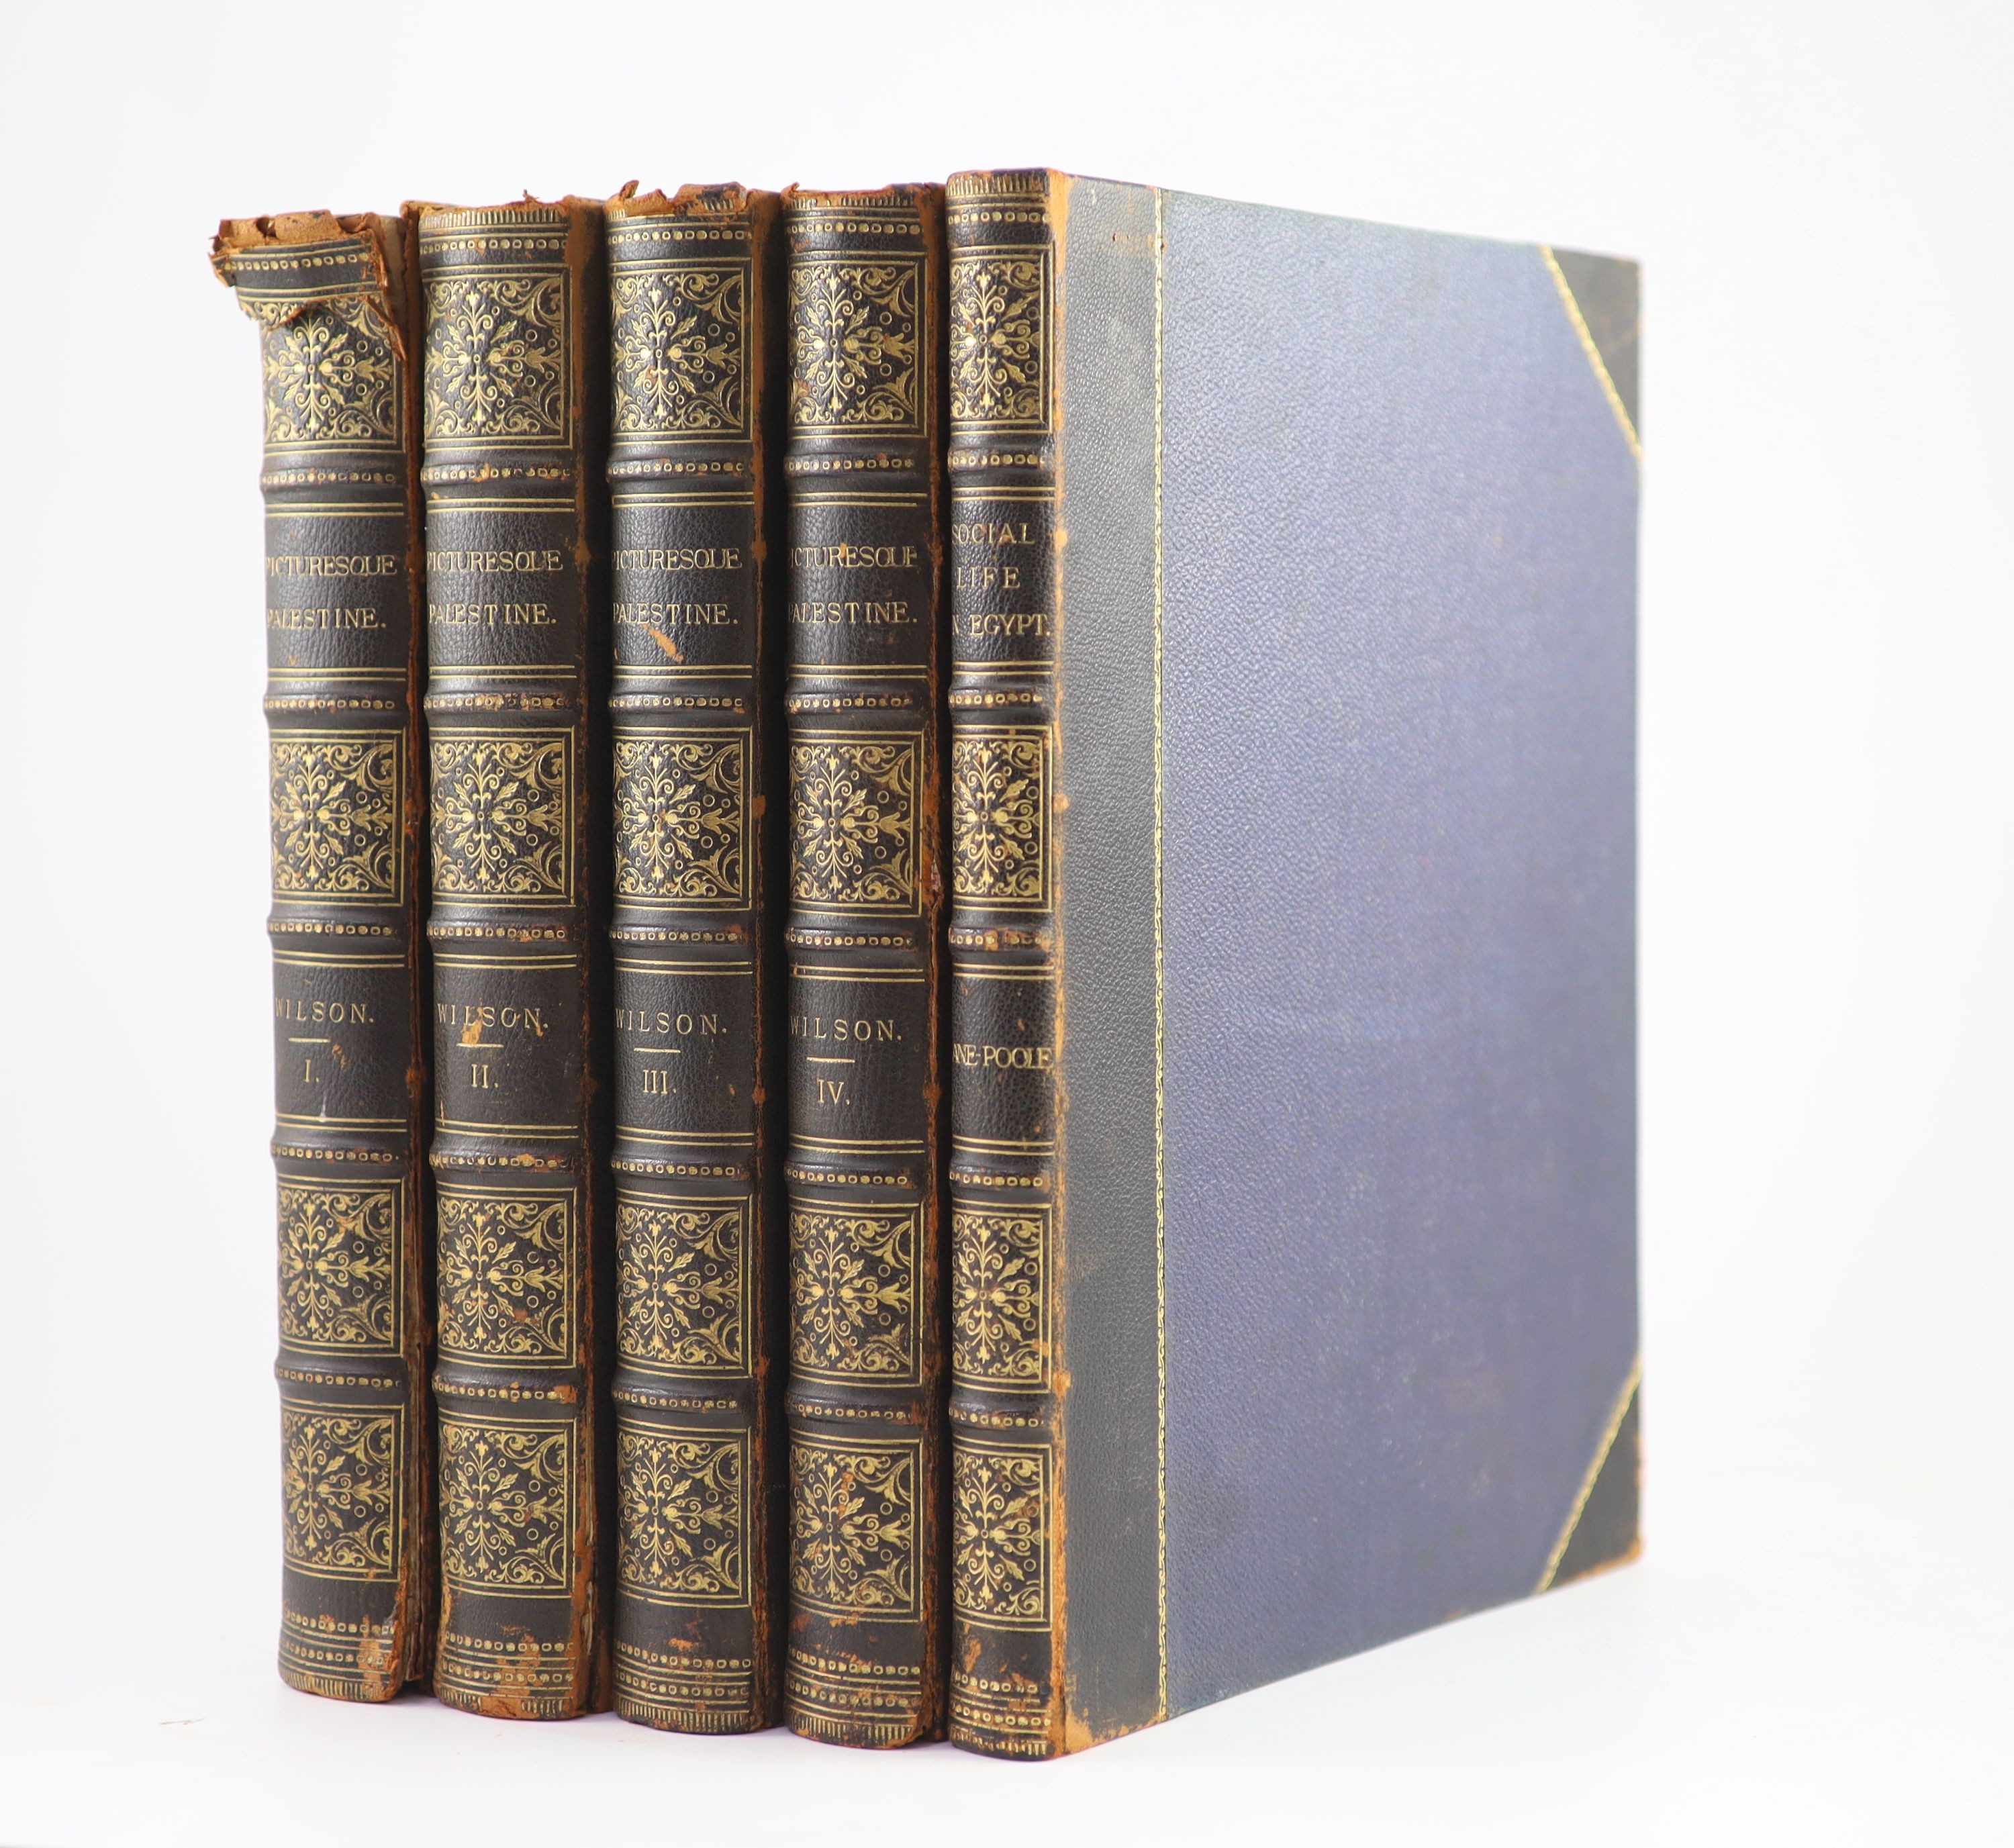 ° Wilson, Charles William, Sir - Picturesque Palestine, 5 vols, including supplement (Social Life in